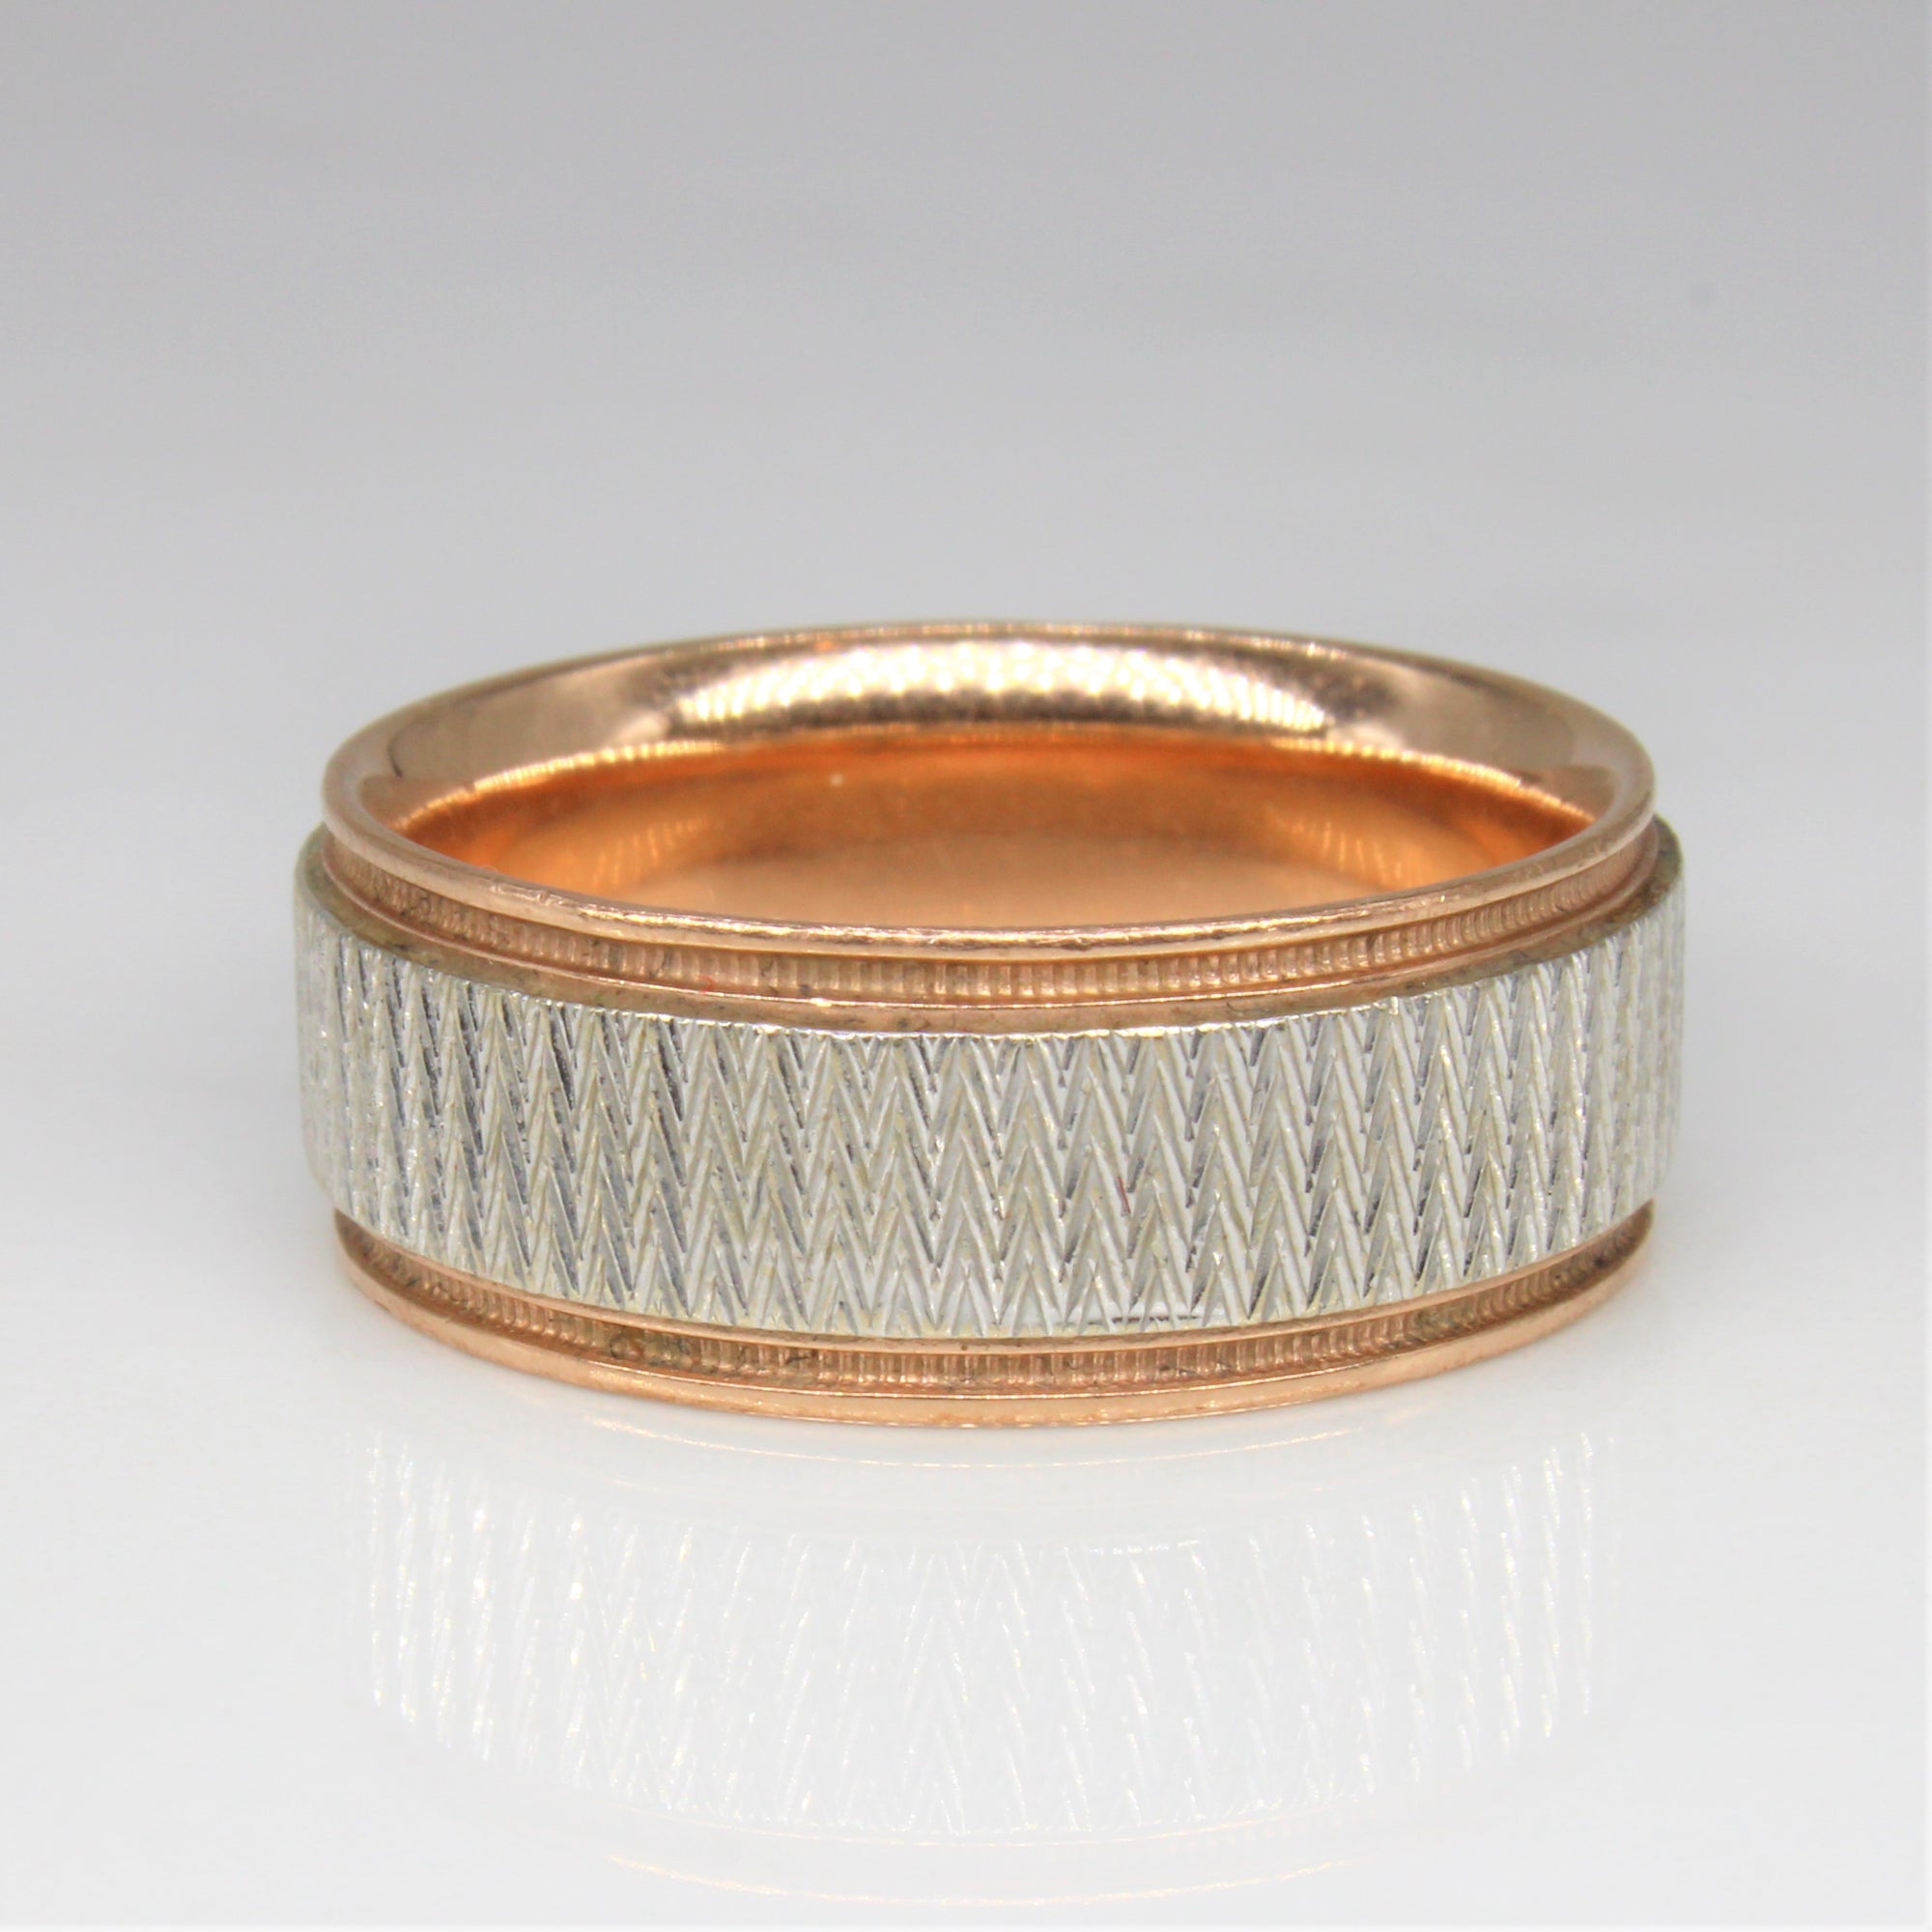 Michael Hill' Two Tone Patterned Ring | SZ 10 |